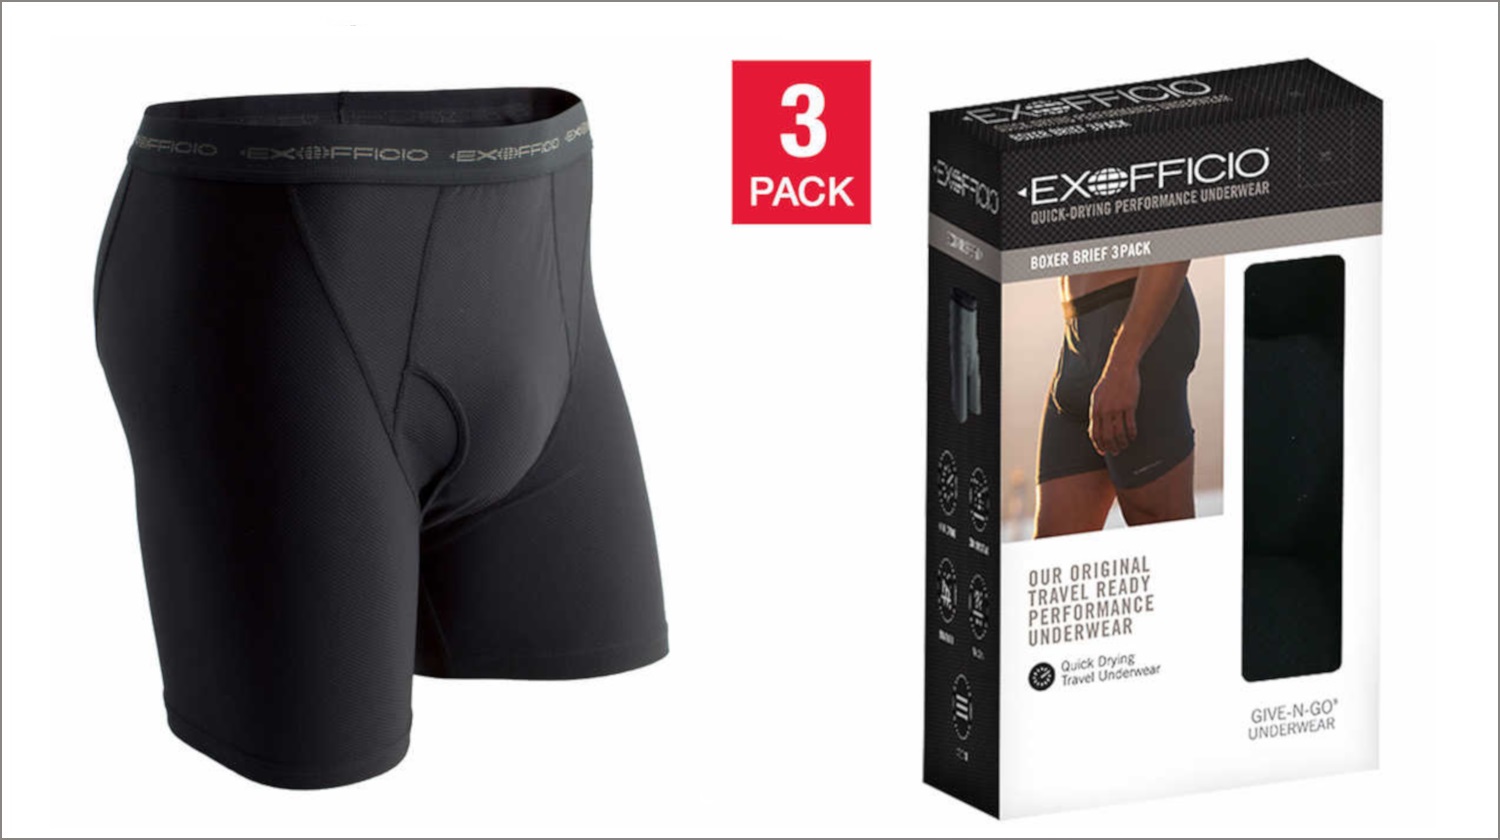 Steal Alert: ExOfficio Give-N-Go Boxer Brief 3 Pack for $21 – $30